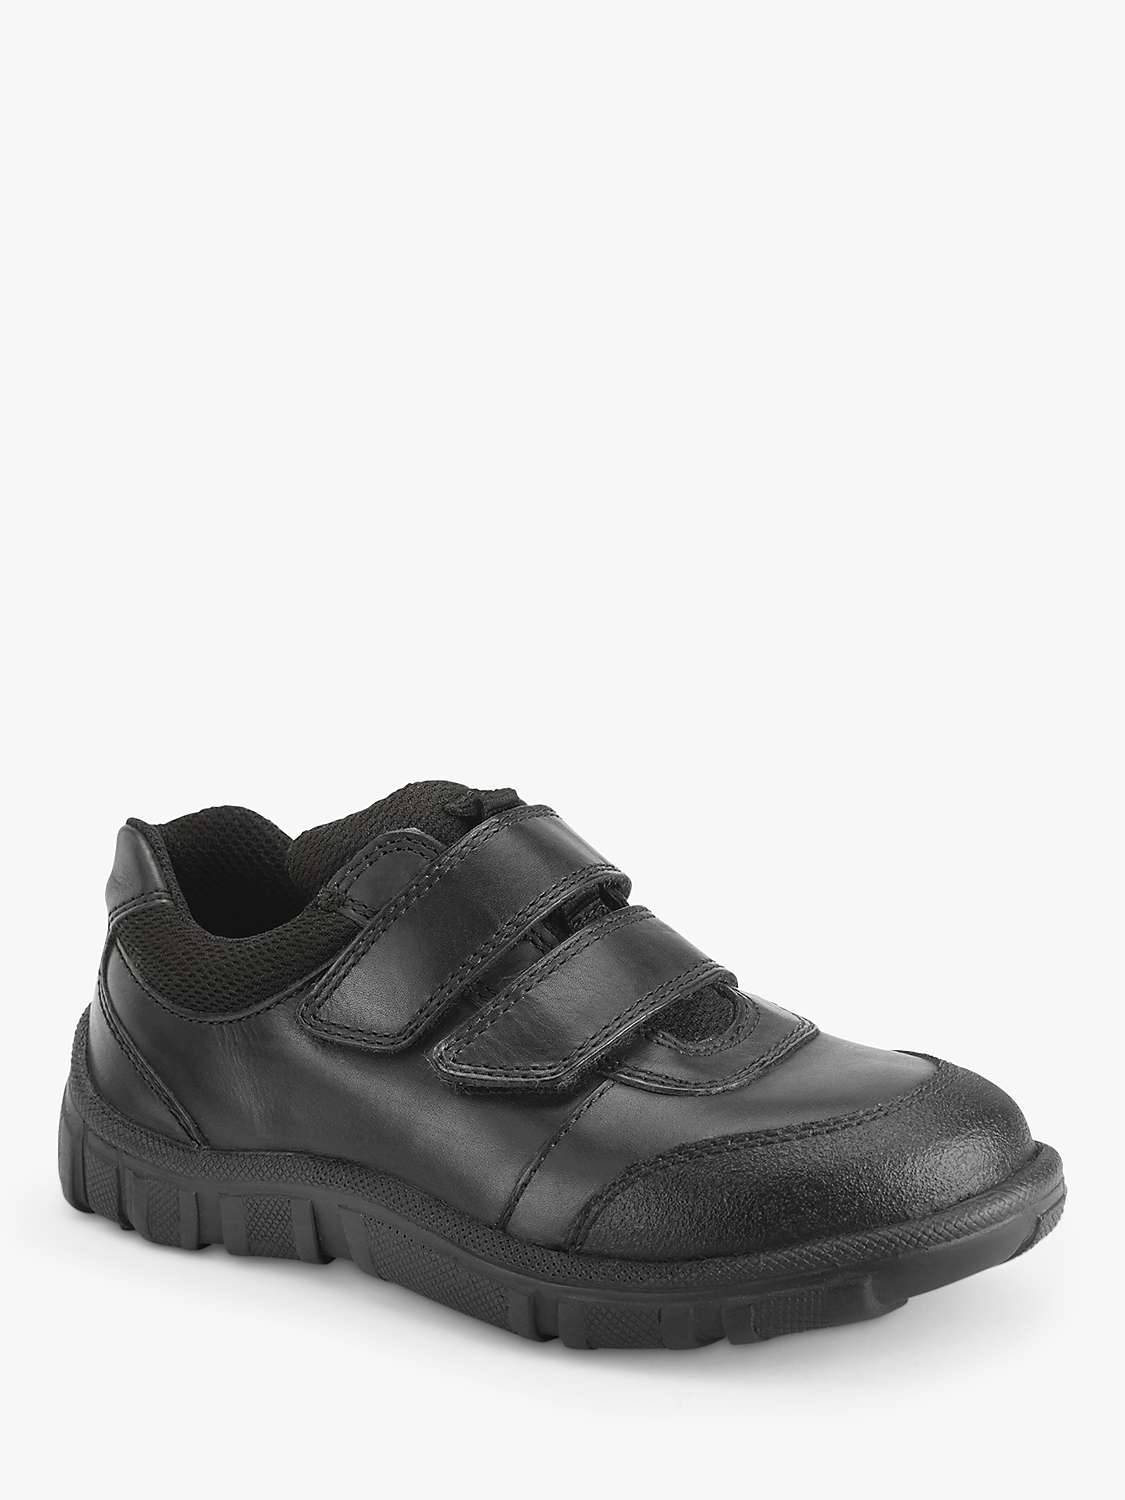 Buy Simply by Start-Rite Kids' Learn Riptape School Shoes Online at johnlewis.com